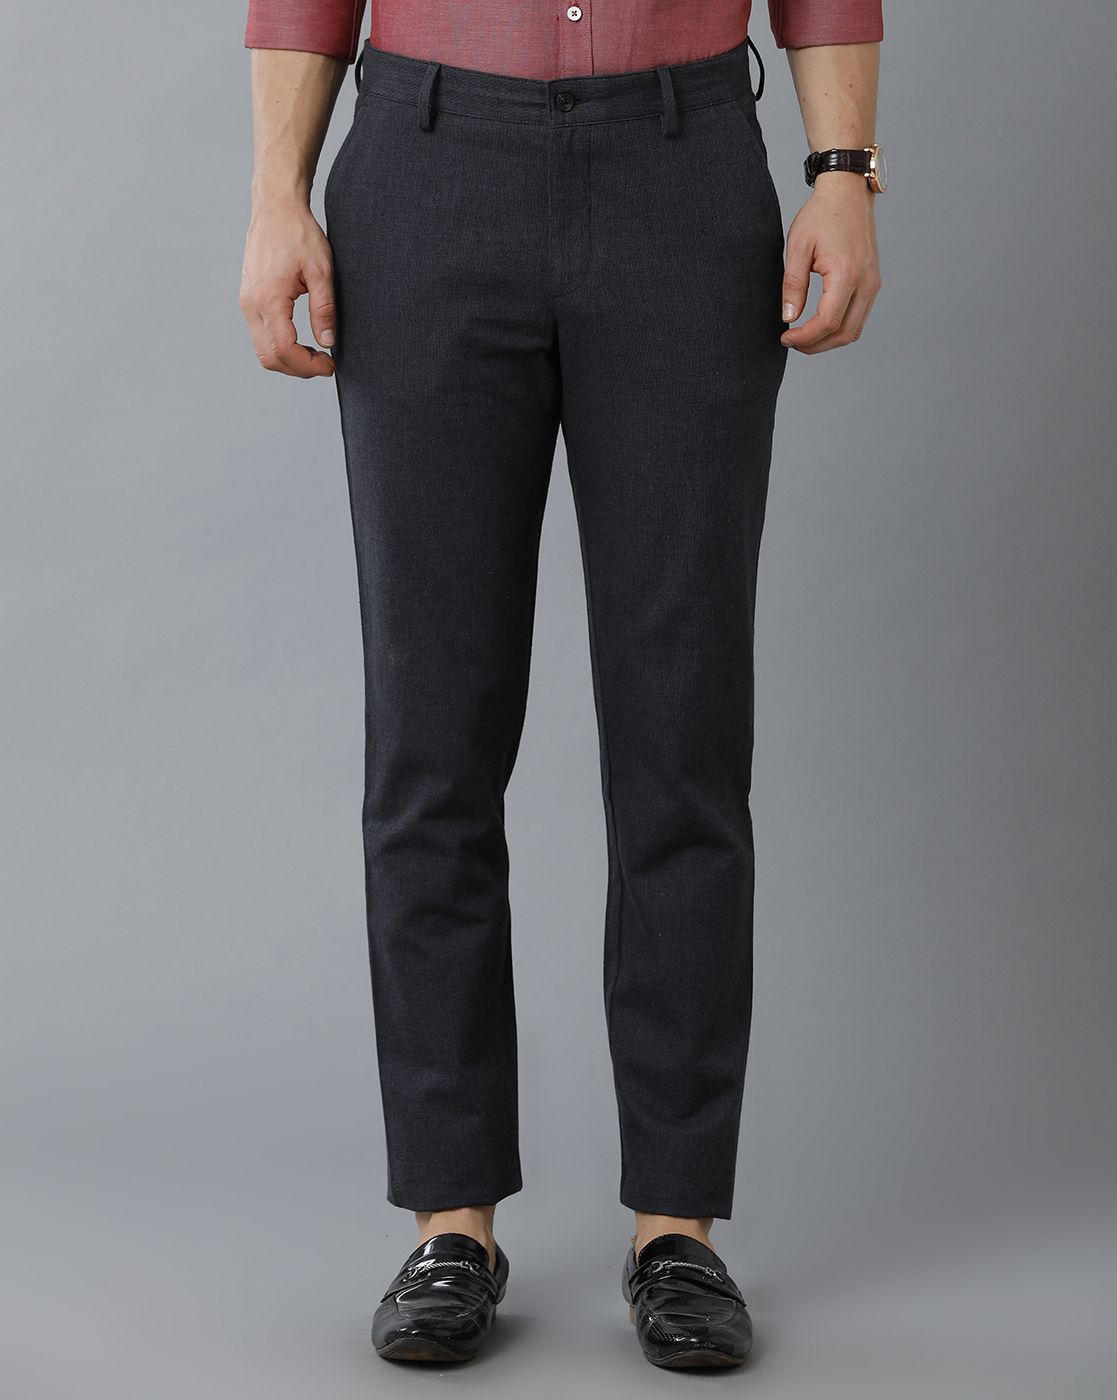 Black Linen Look Elastcated Waist Detail Trousers  PrettyLittleThing